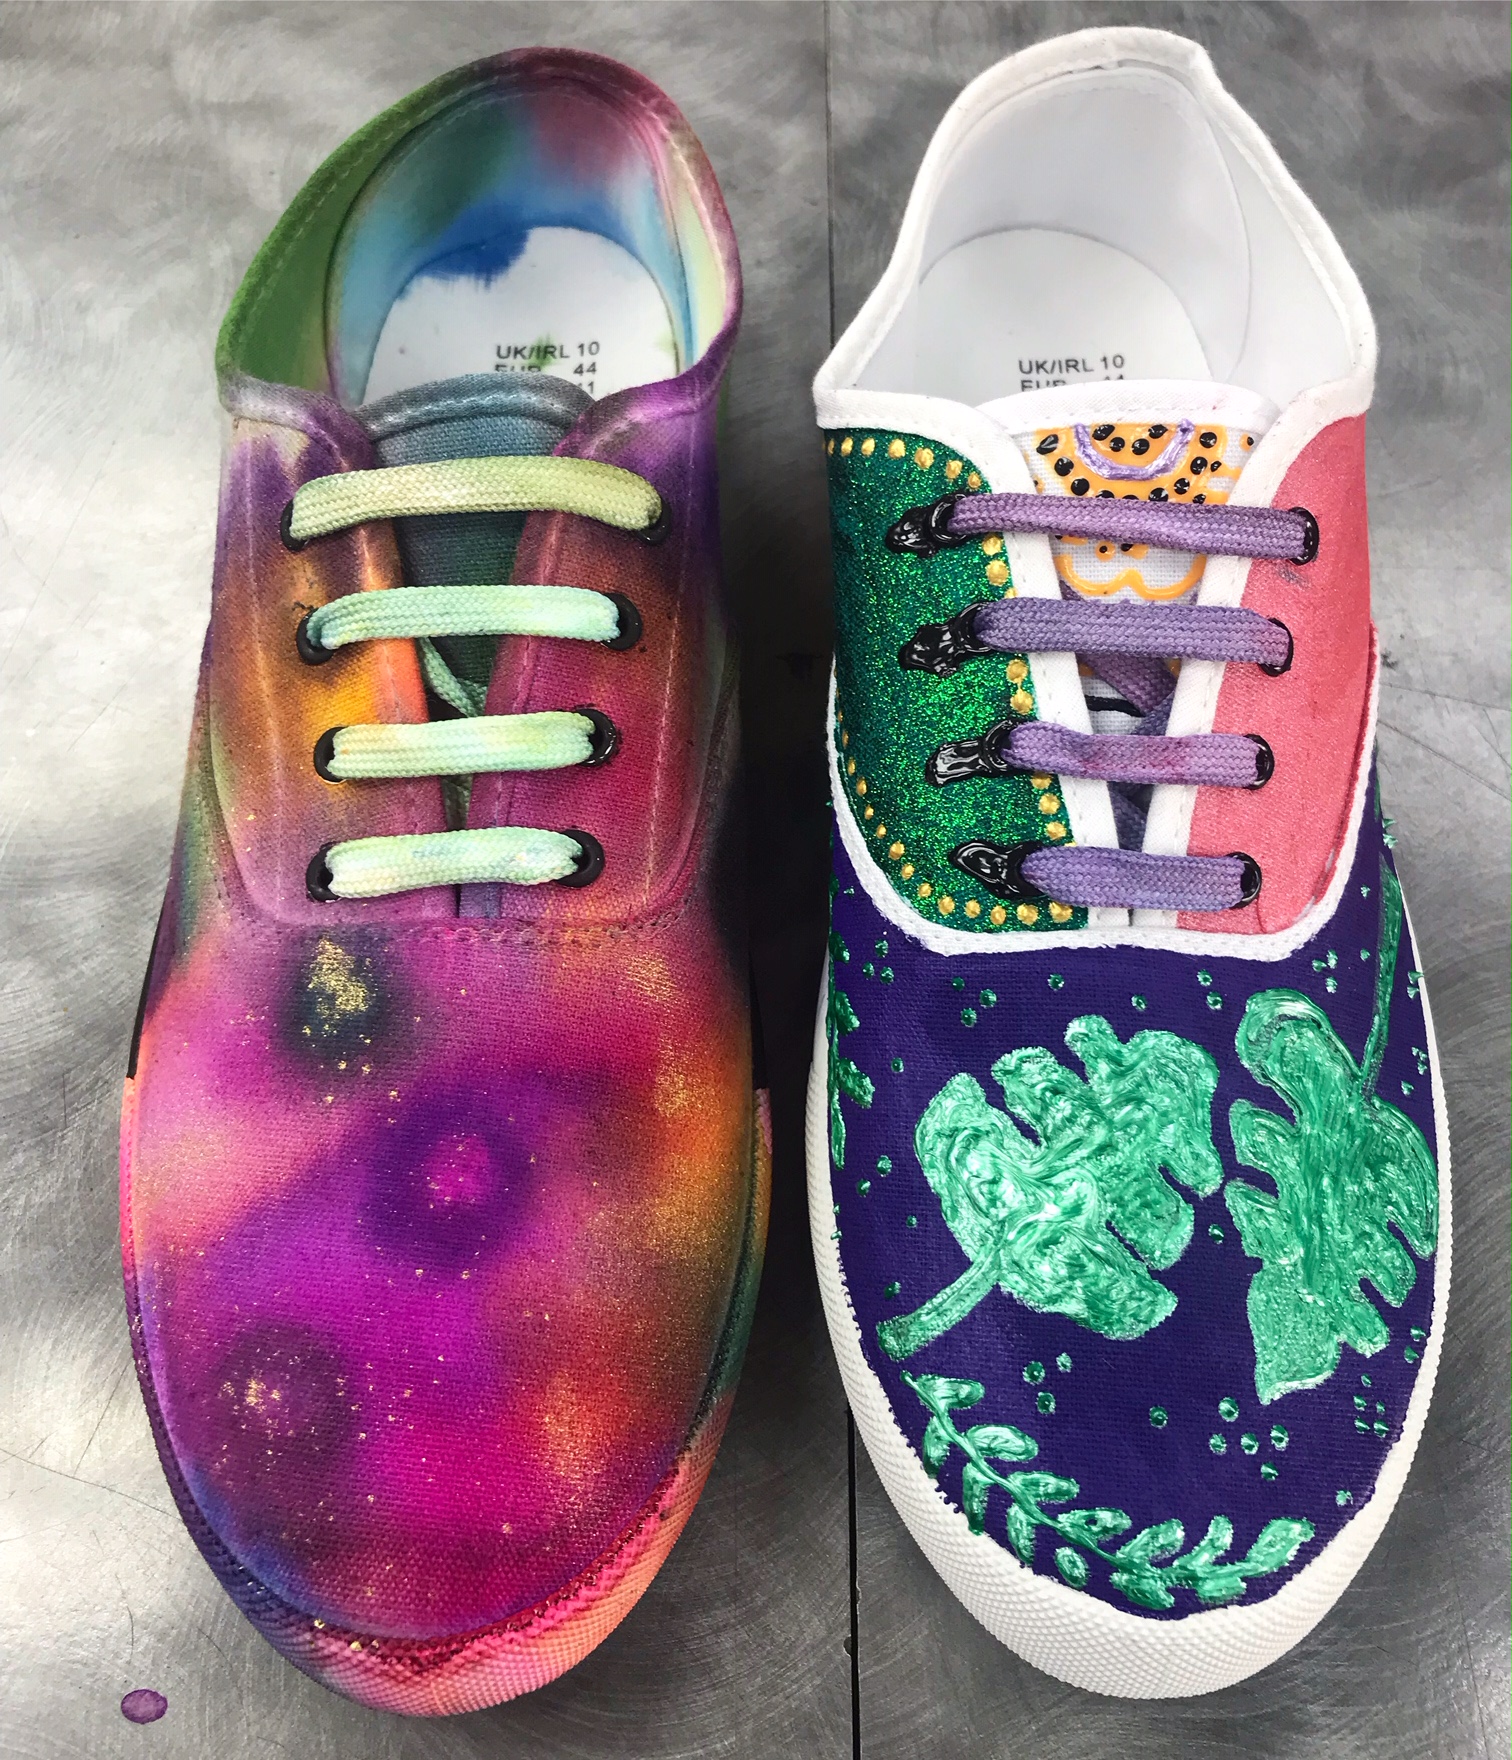 How to Decorate Canvas Shoes using Alcohol Inks, Setacolor paints and Tulip paint.